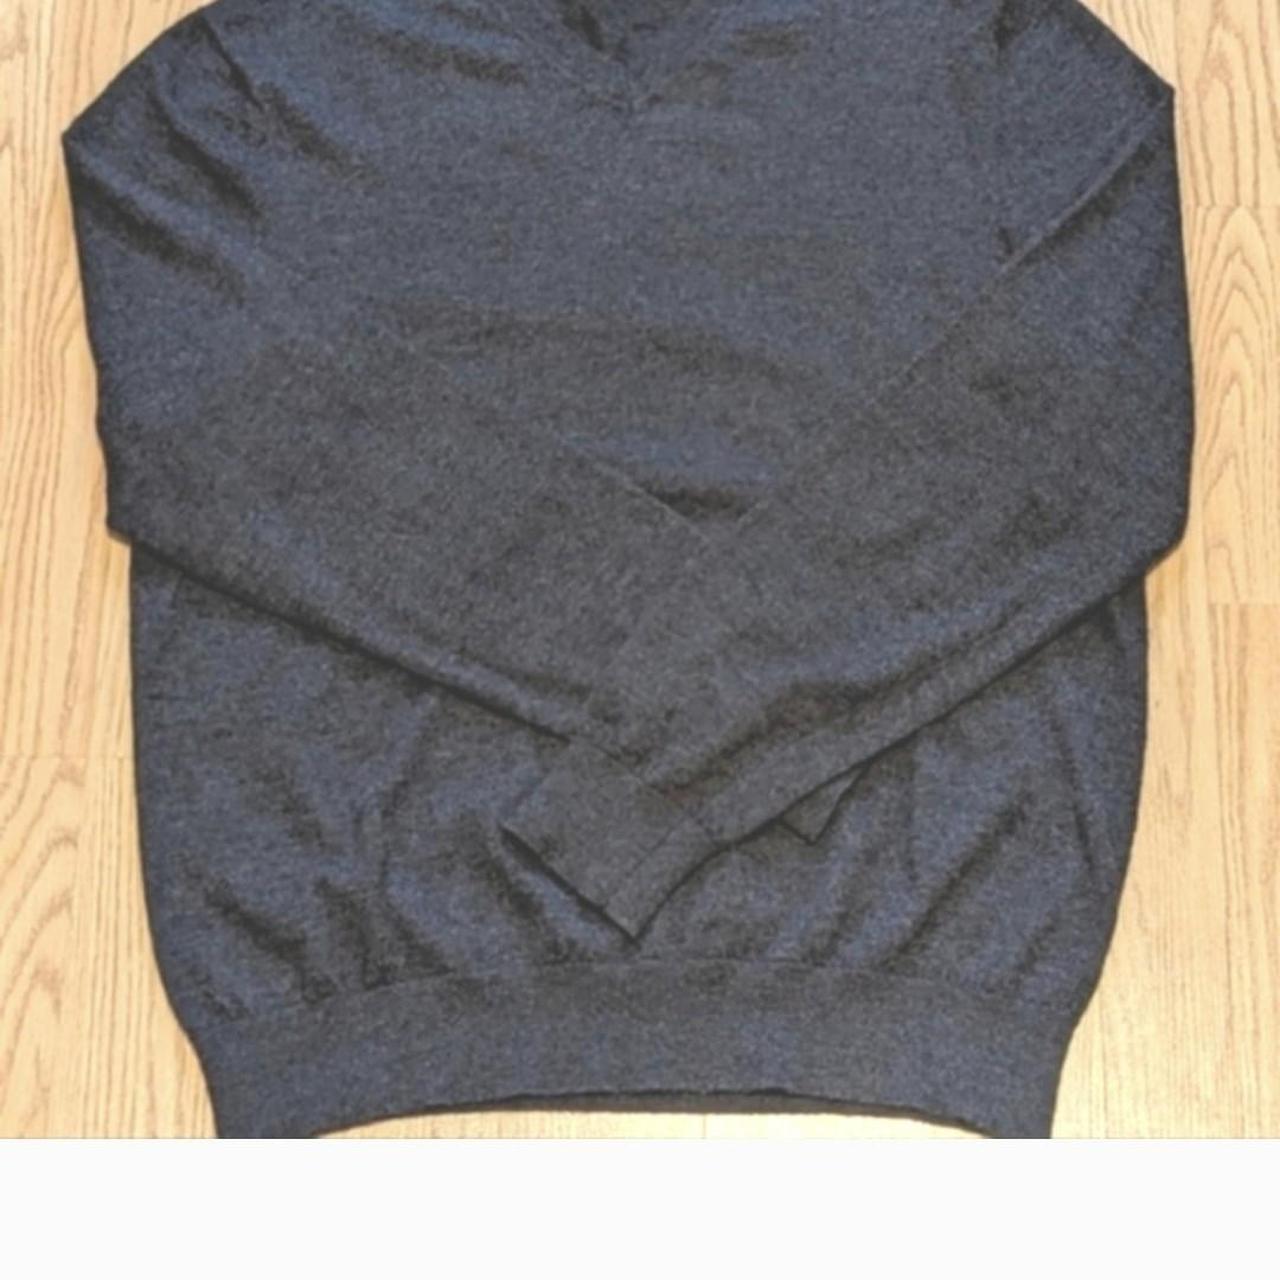 Neiman Marcus 100% cashmere sweater-charcoal gray,... - Depop